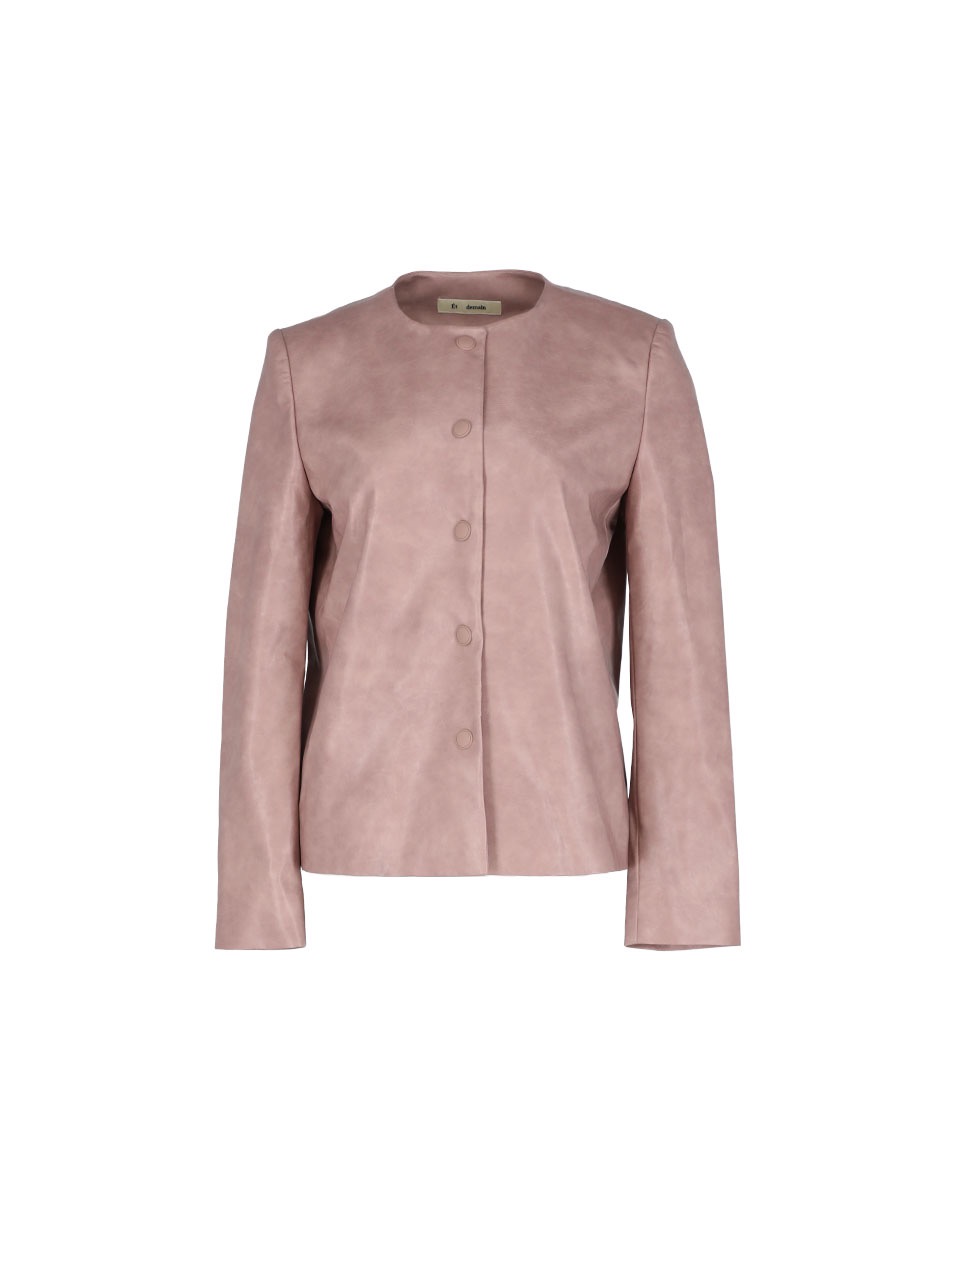 Round Cropped leather jacket (Dusty Pink)